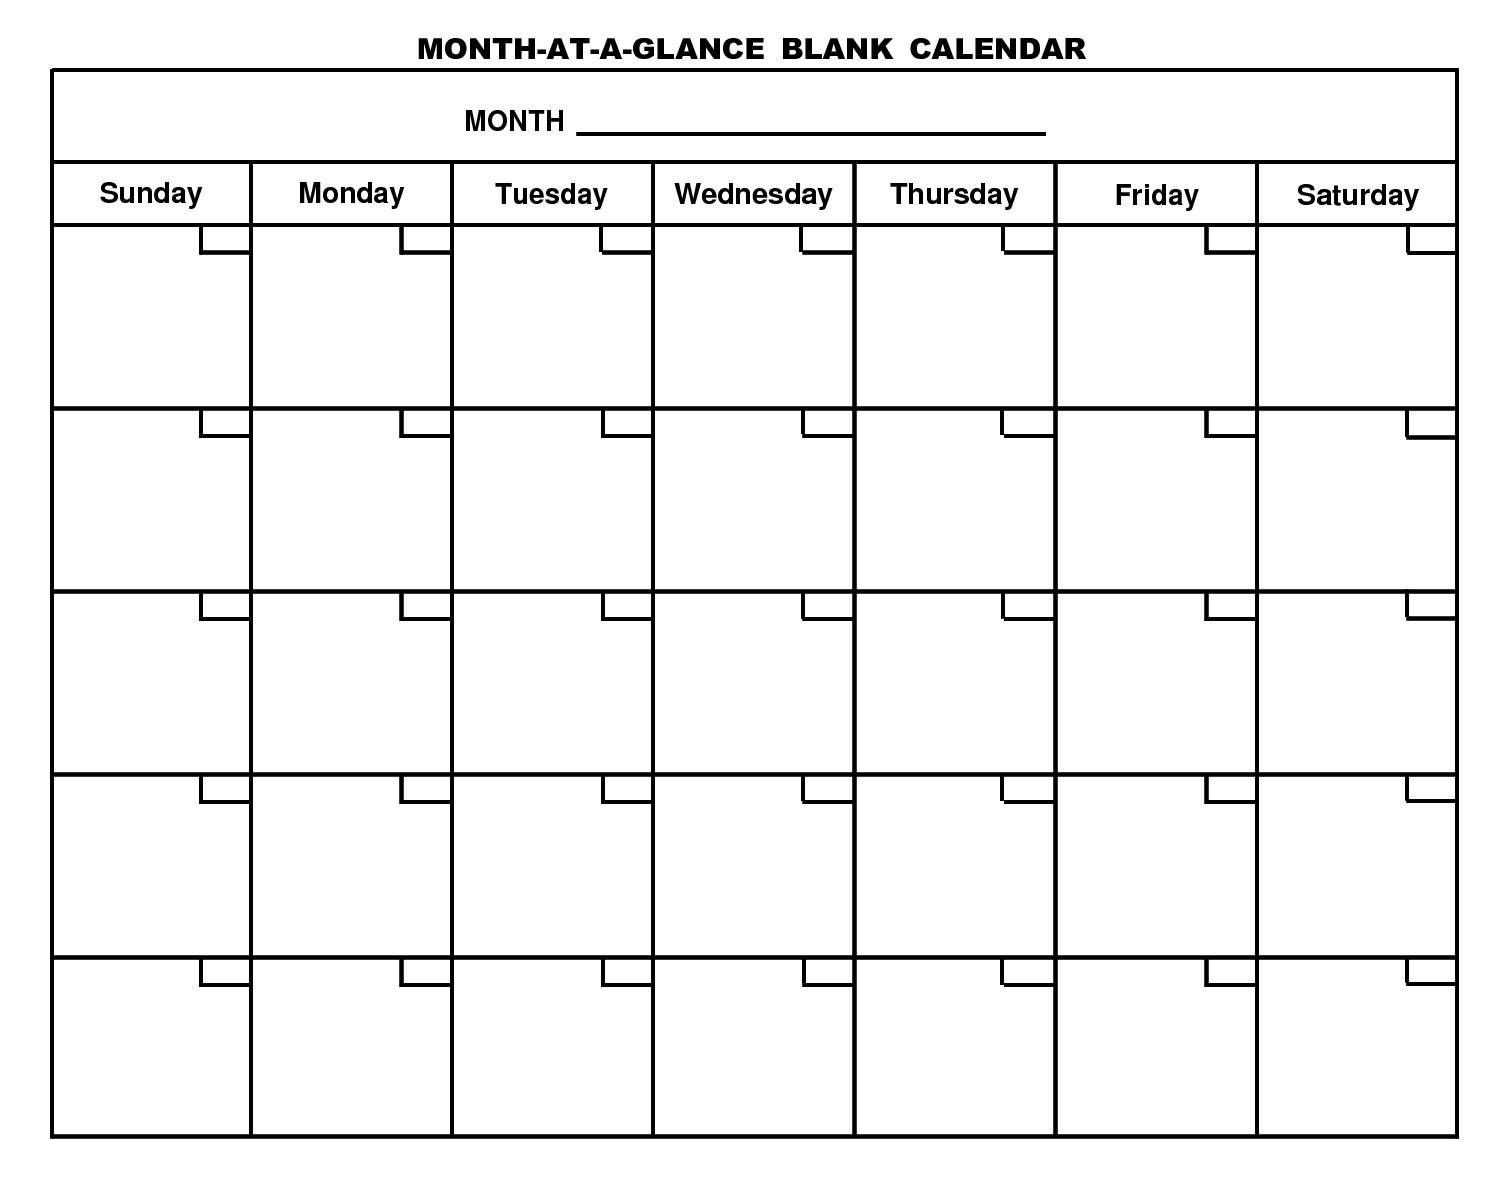 Calendar To Print Out Monthly | Blank Calendar | Pinterest | Blank Calendar Month To Print